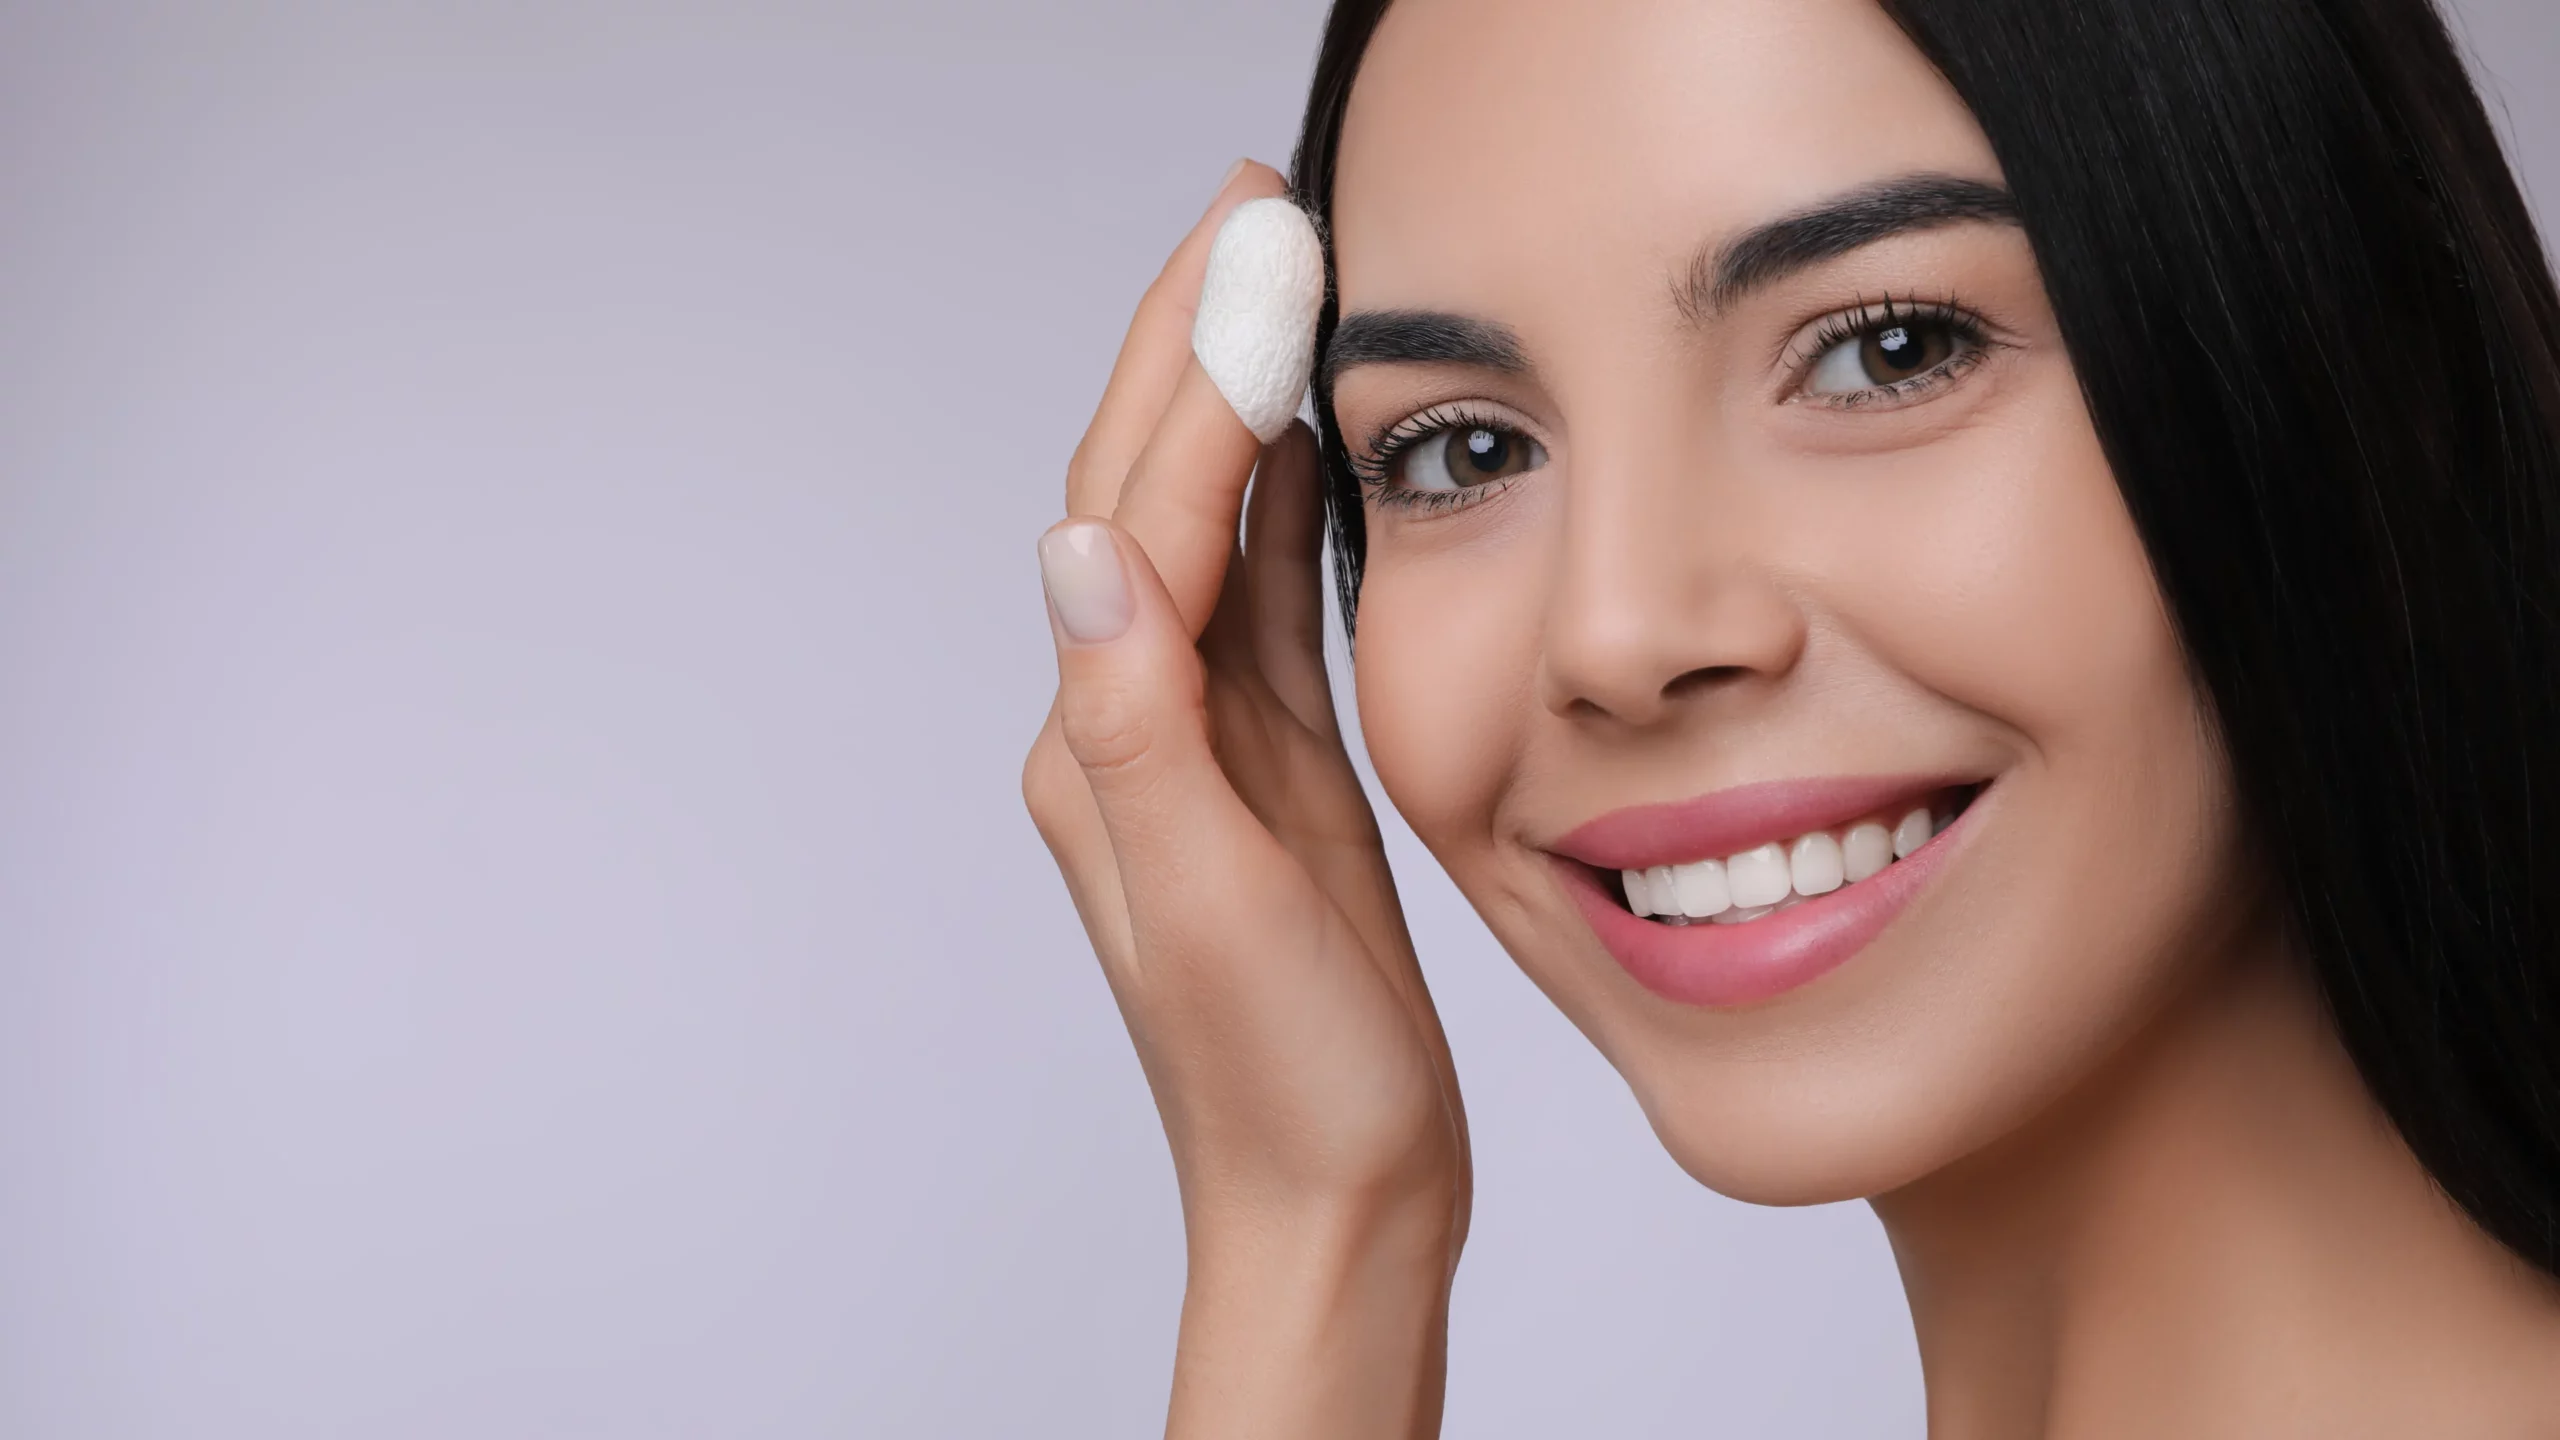 Skin care dermatology compounds available at East Coast Compounding